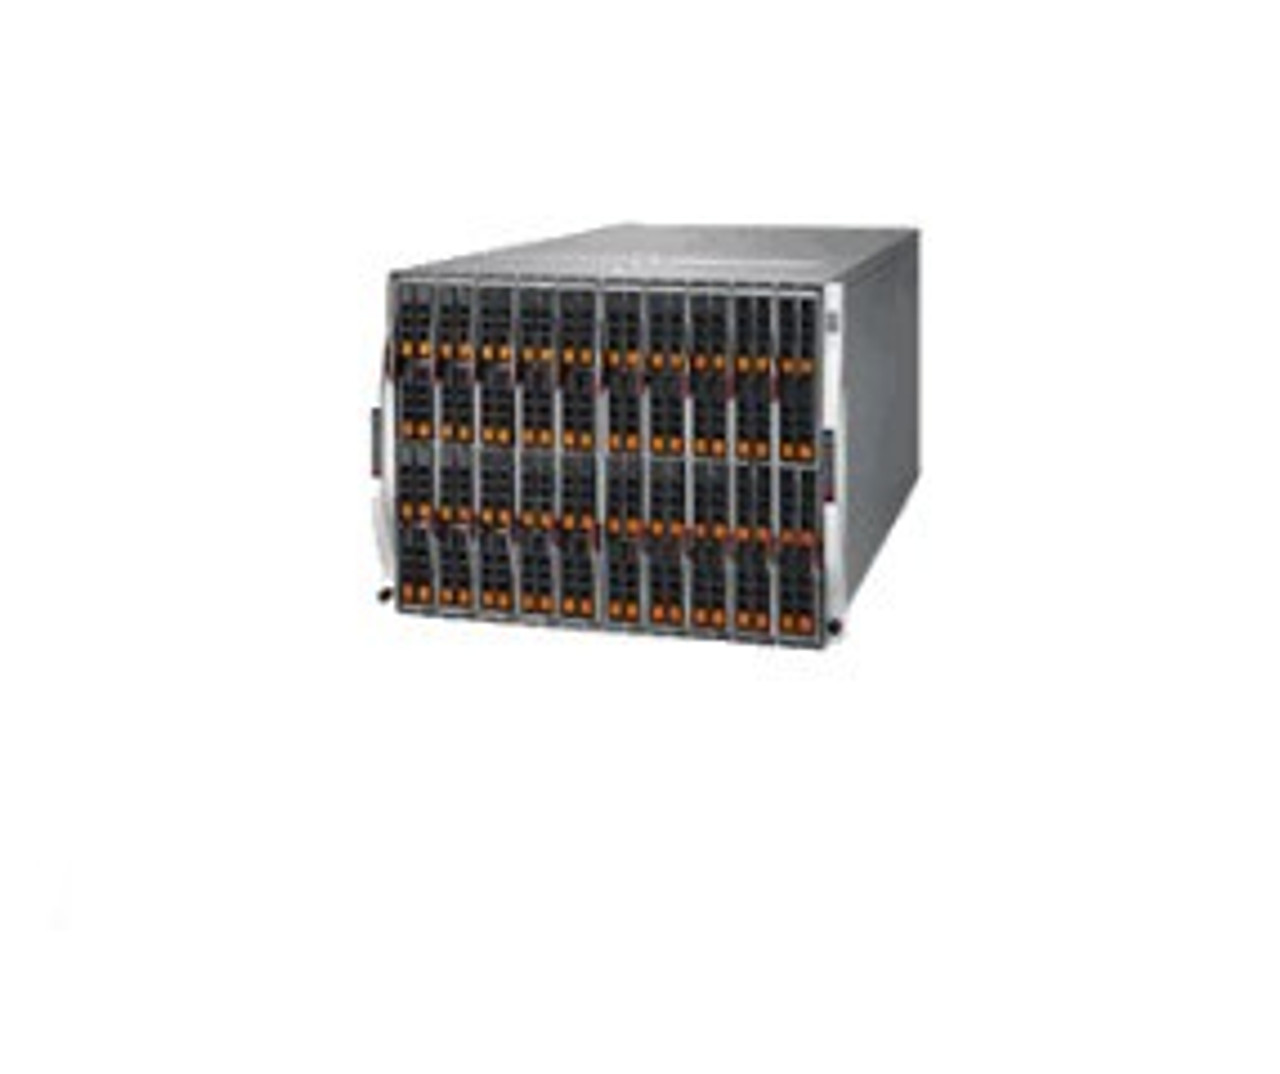 SBE-820C-822 | Supermicro | network equipment chassis Black,Grey